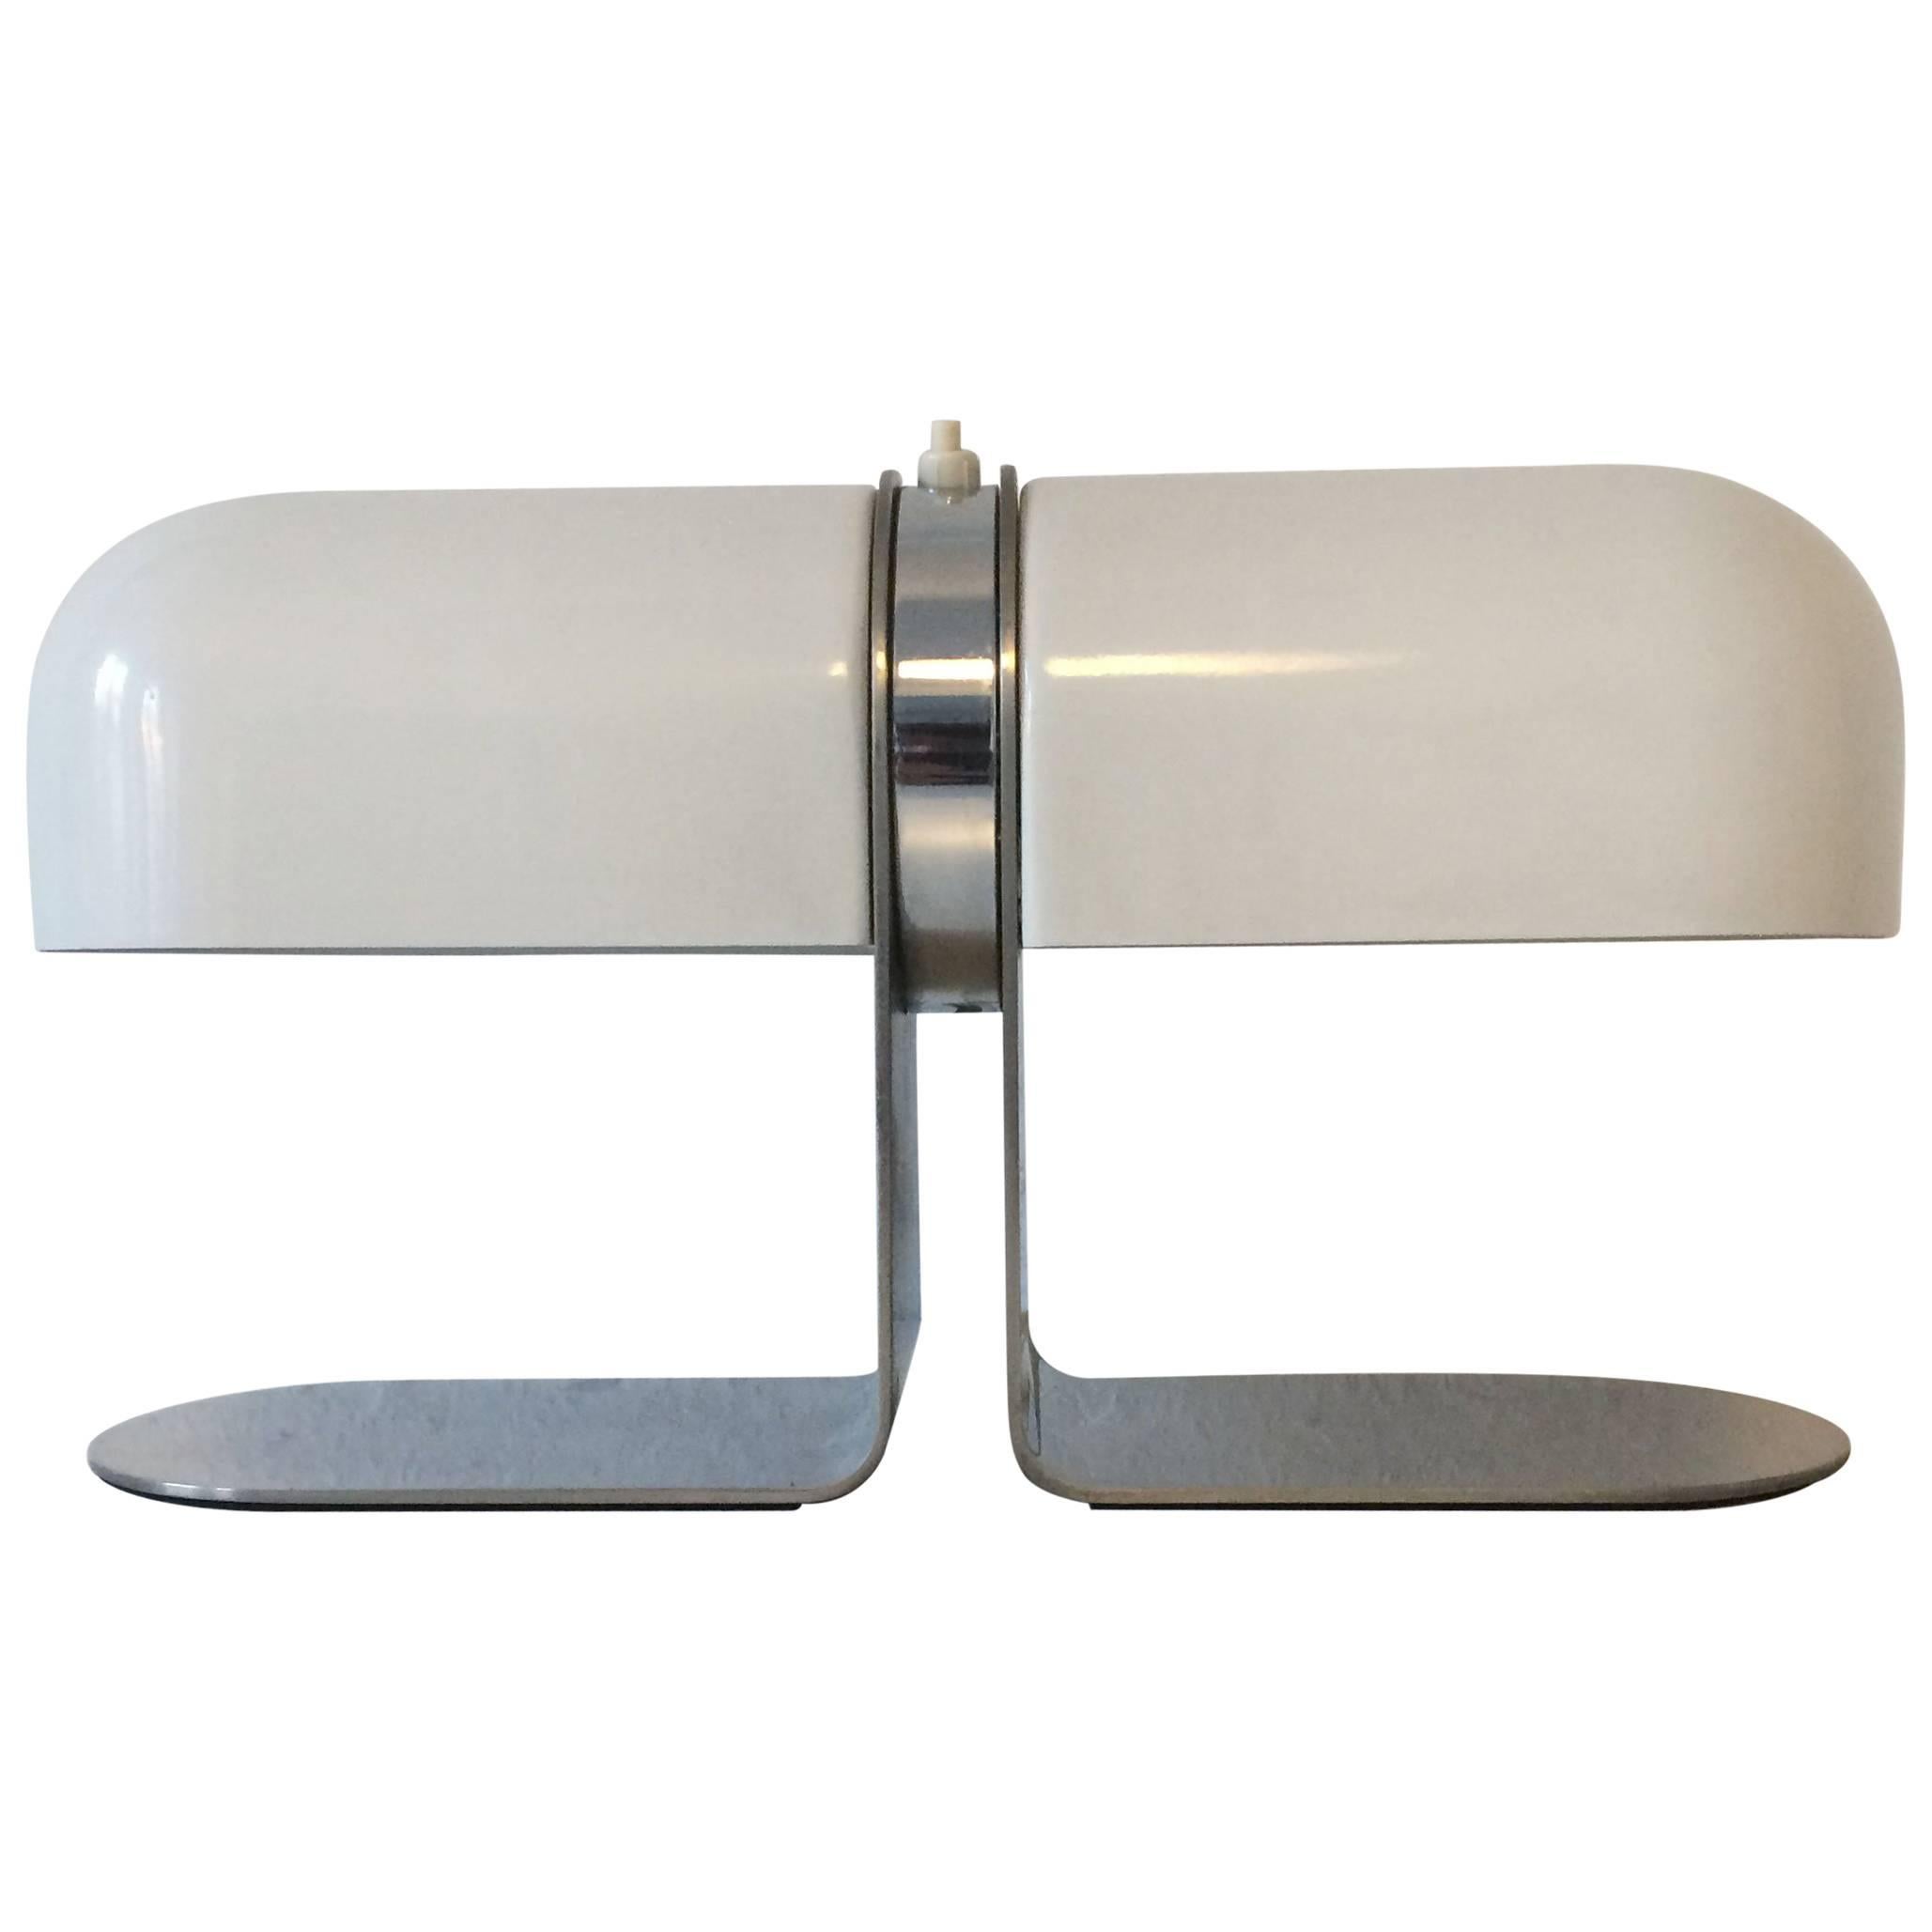 Rare Mid Century Modern Table Lamp or Desk Light by Andre Ricard for Metalarte For Sale